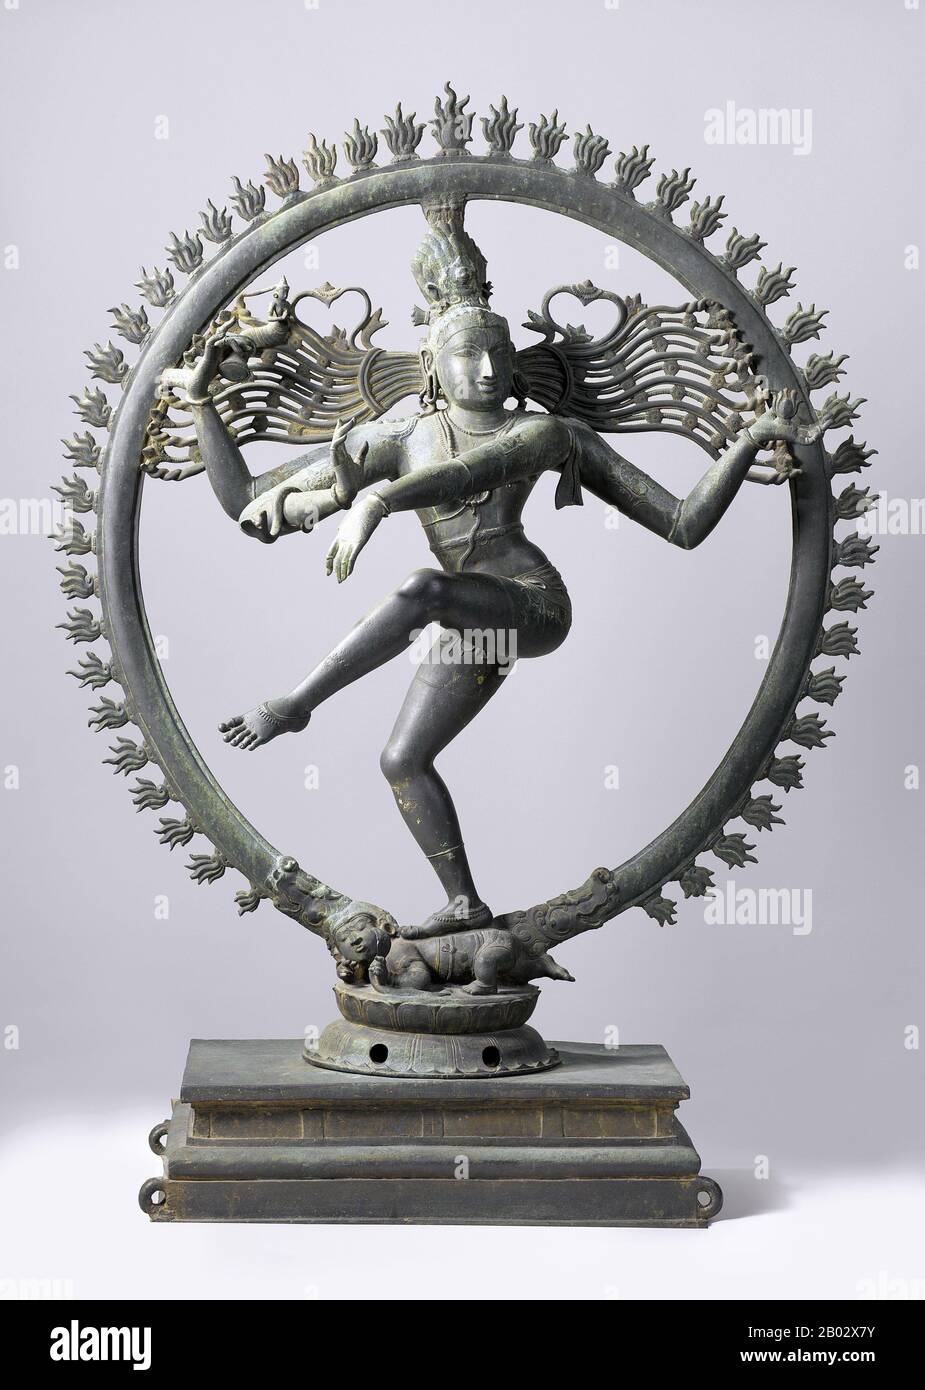 Nataraja or Nataraj ('The Lord - or King - of Dance'; Tamil: Kooththan) is  a depiction of the Hindu god Shiva as the cosmic dancer Koothan who  performs his divine dance to